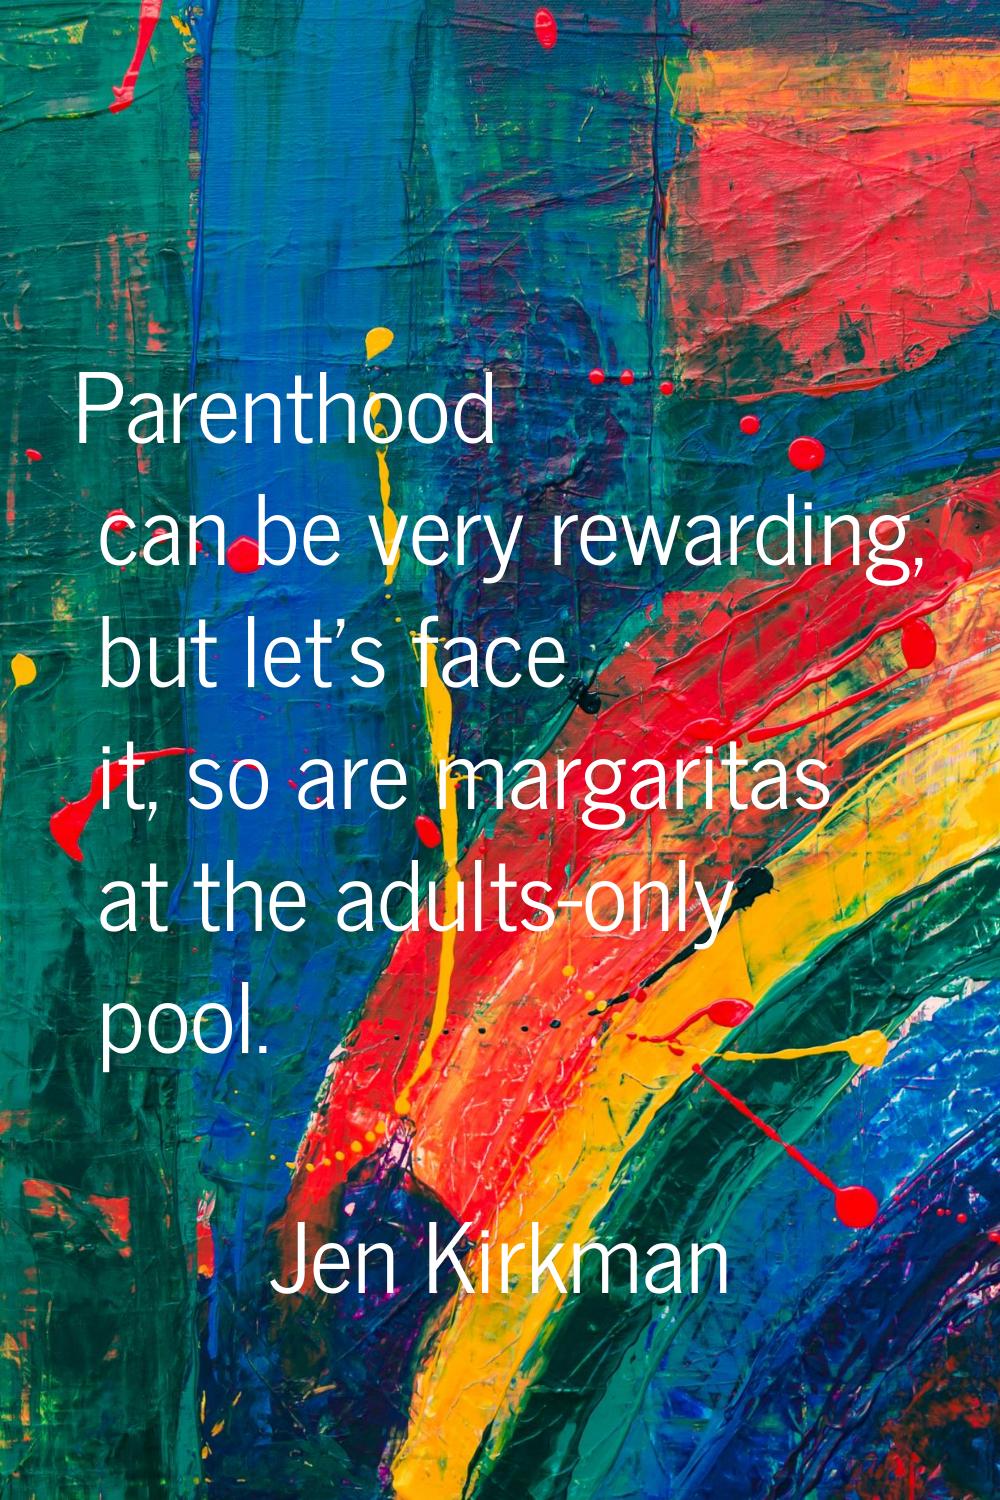 Parenthood can be very rewarding, but let's face it, so are margaritas at the adults-only pool.